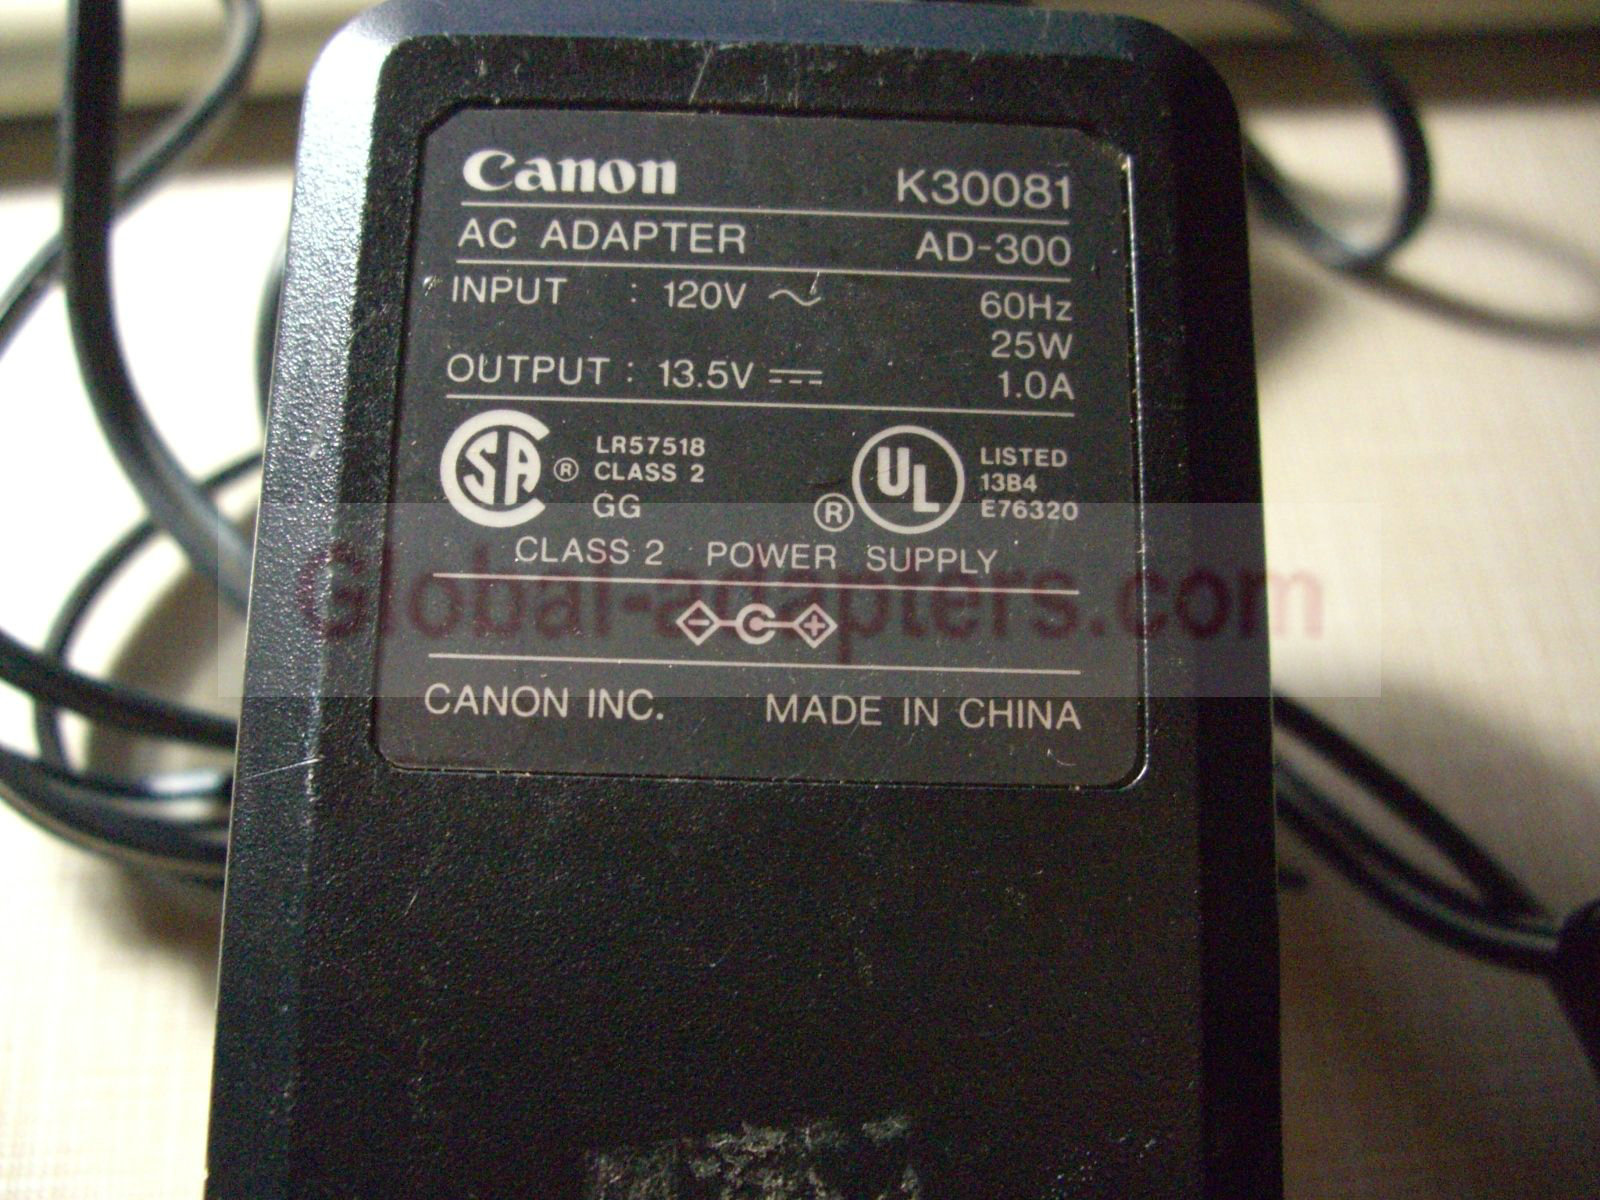 NEW 13.5V 1A CANON K30081 AD300 AC ADAPTER - Click Image to Close